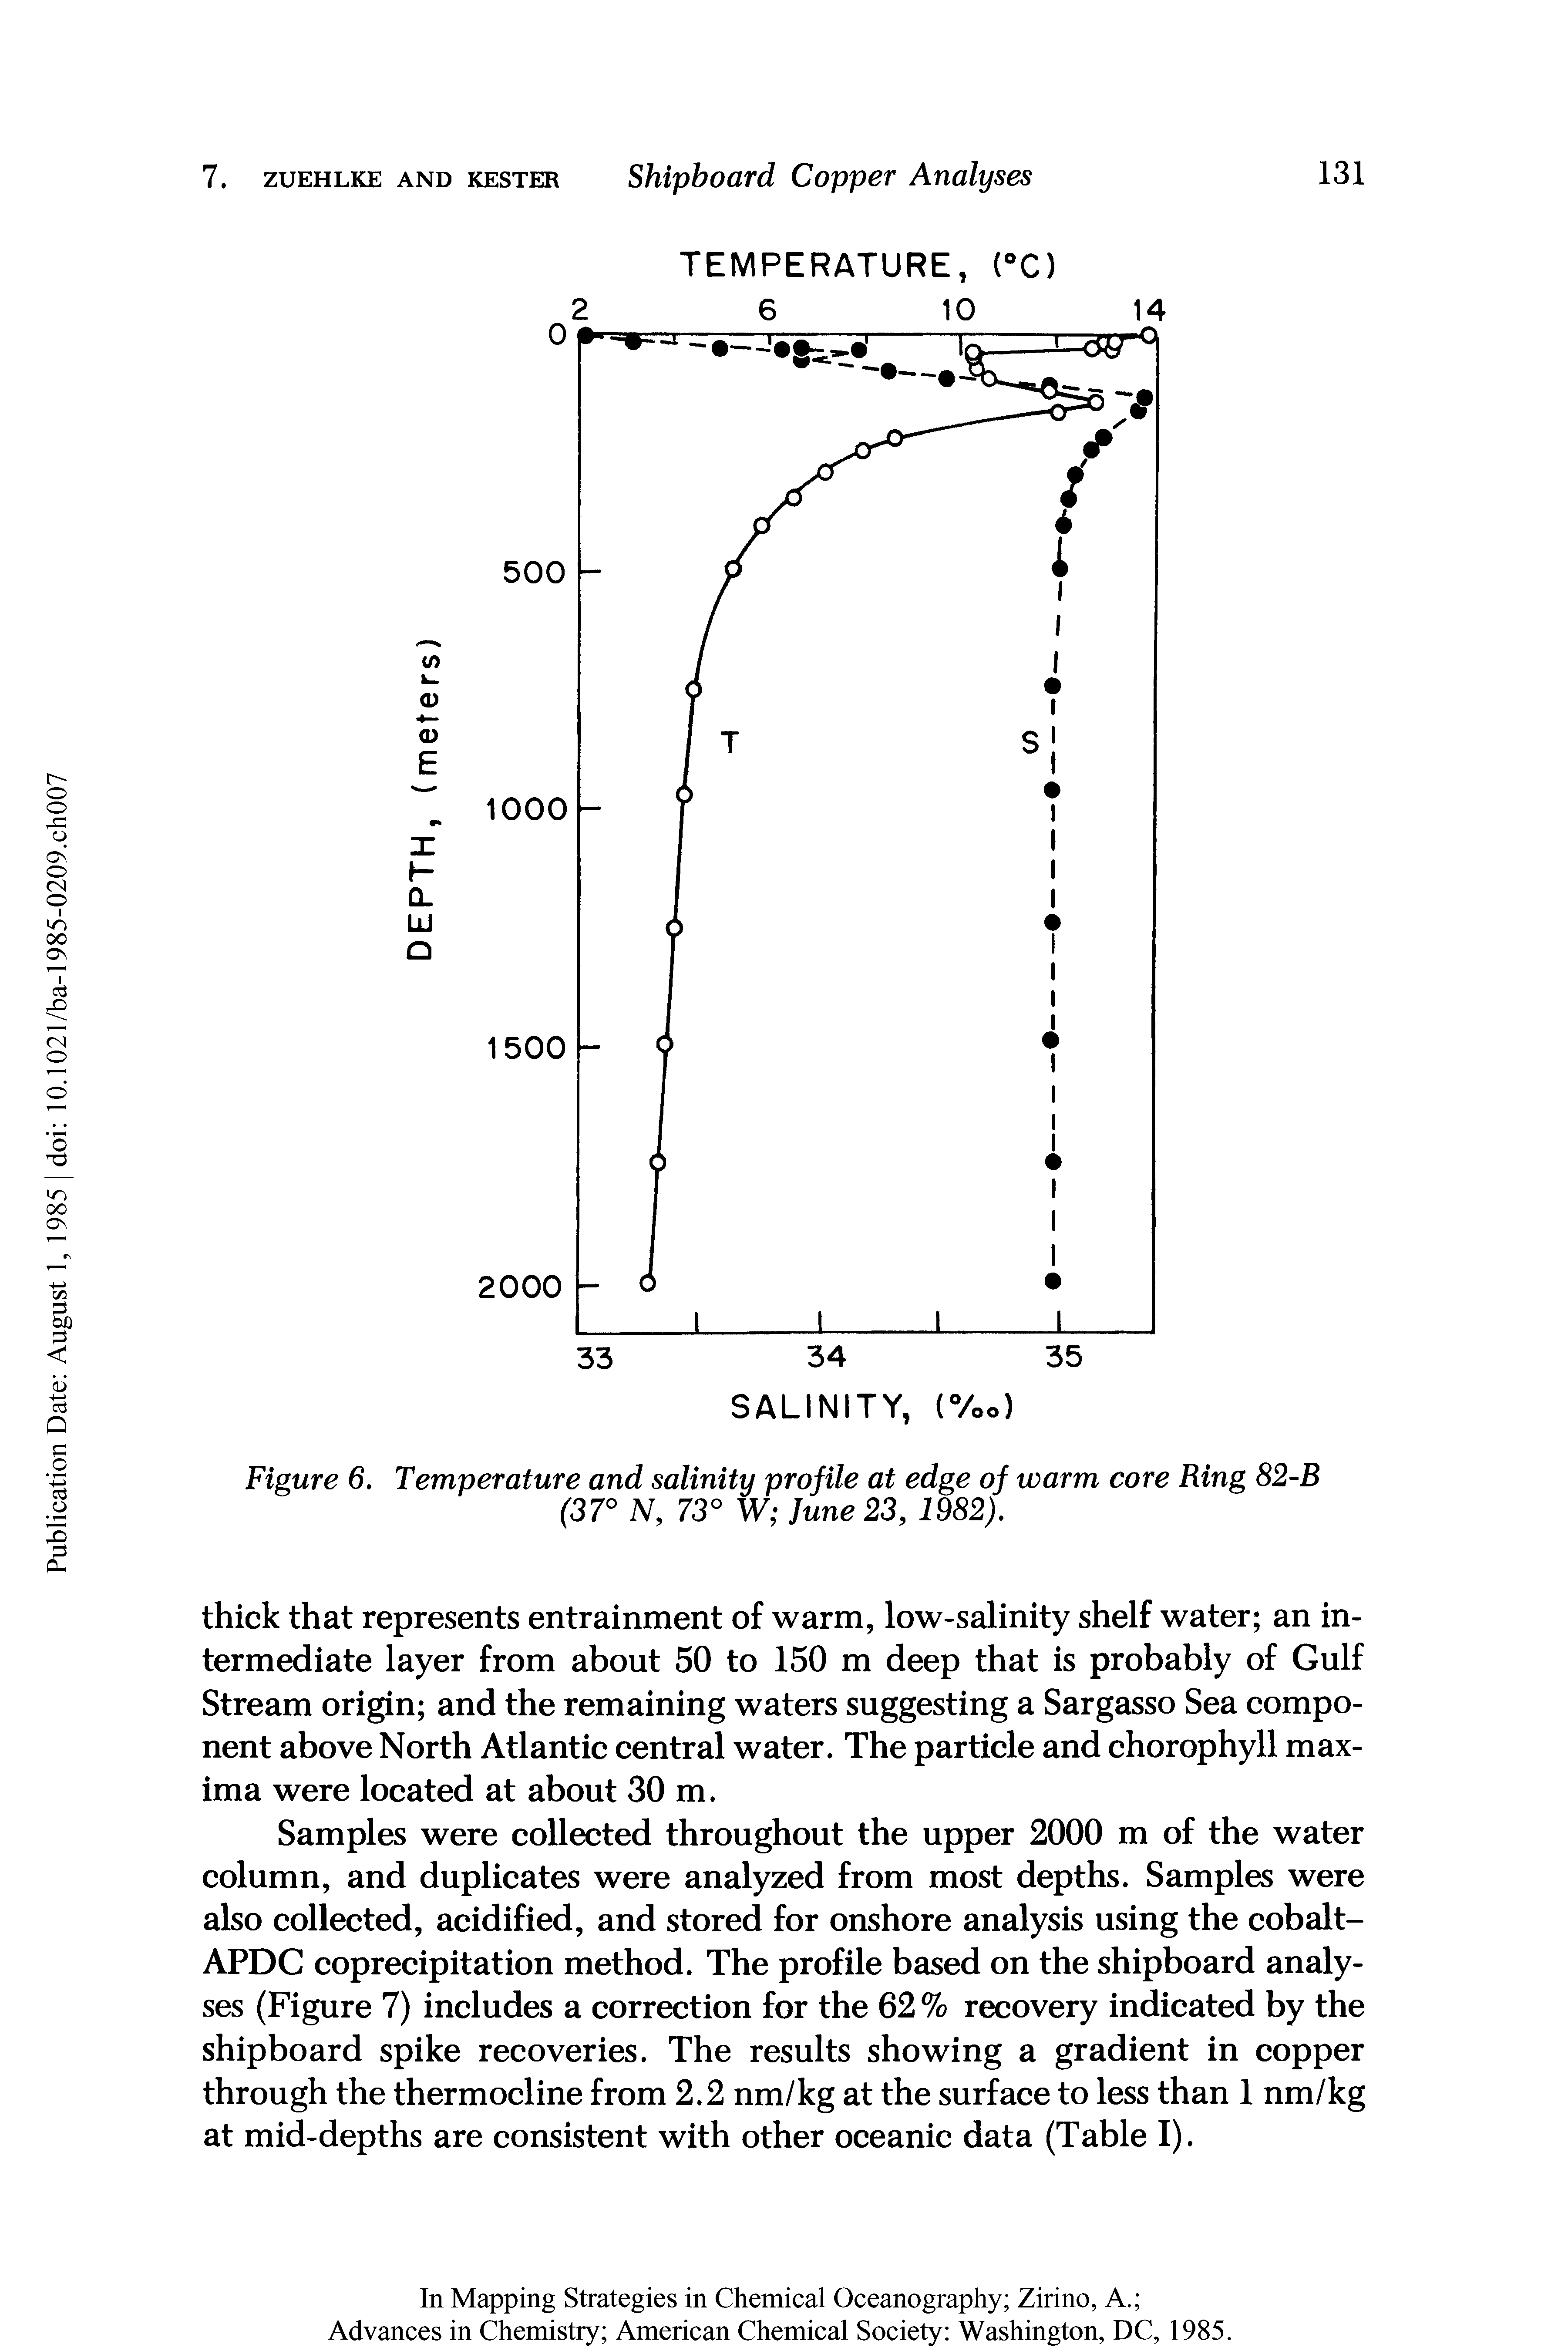 Figure 6. Temperature and salinity profile at edge of warm core Ring 82-B (37° N, 73° W June 23, 1982).